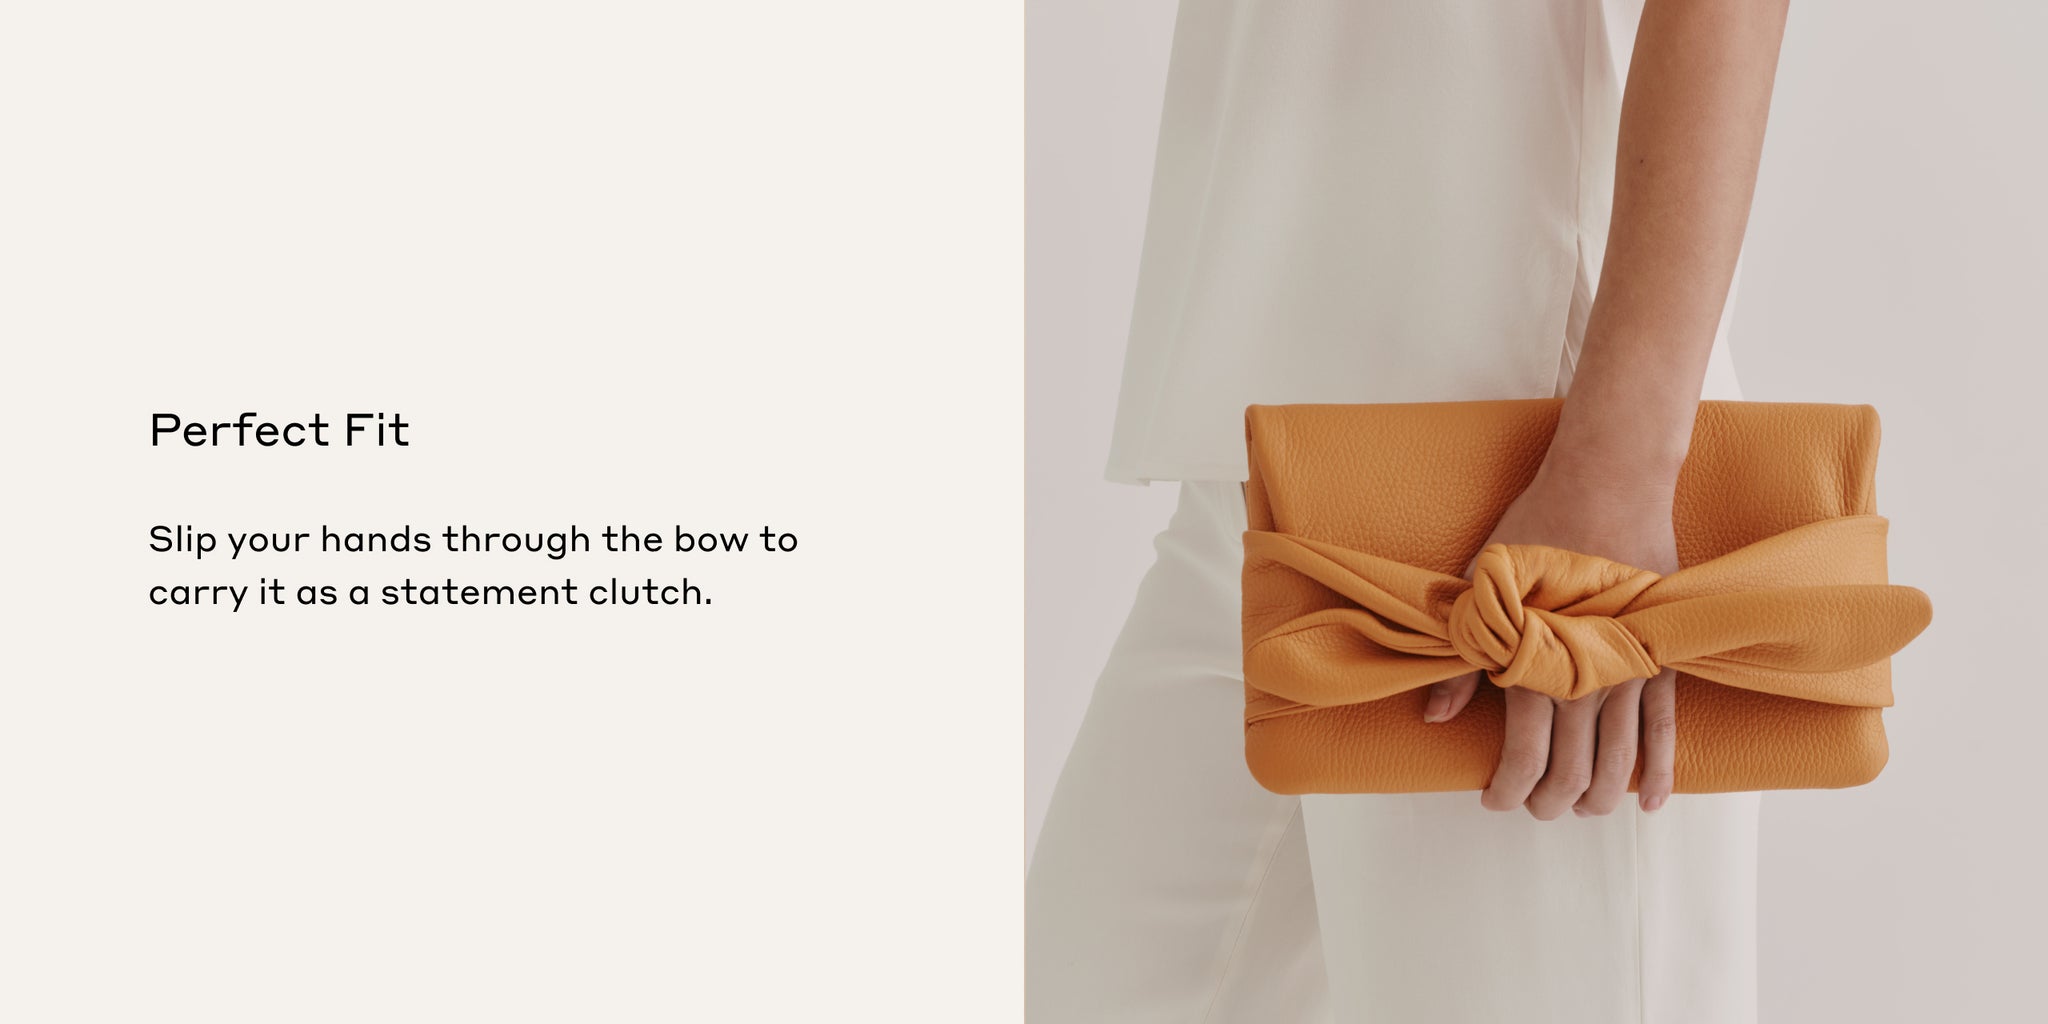 Person holding a large bow clutch bag with text about the product on the left side.